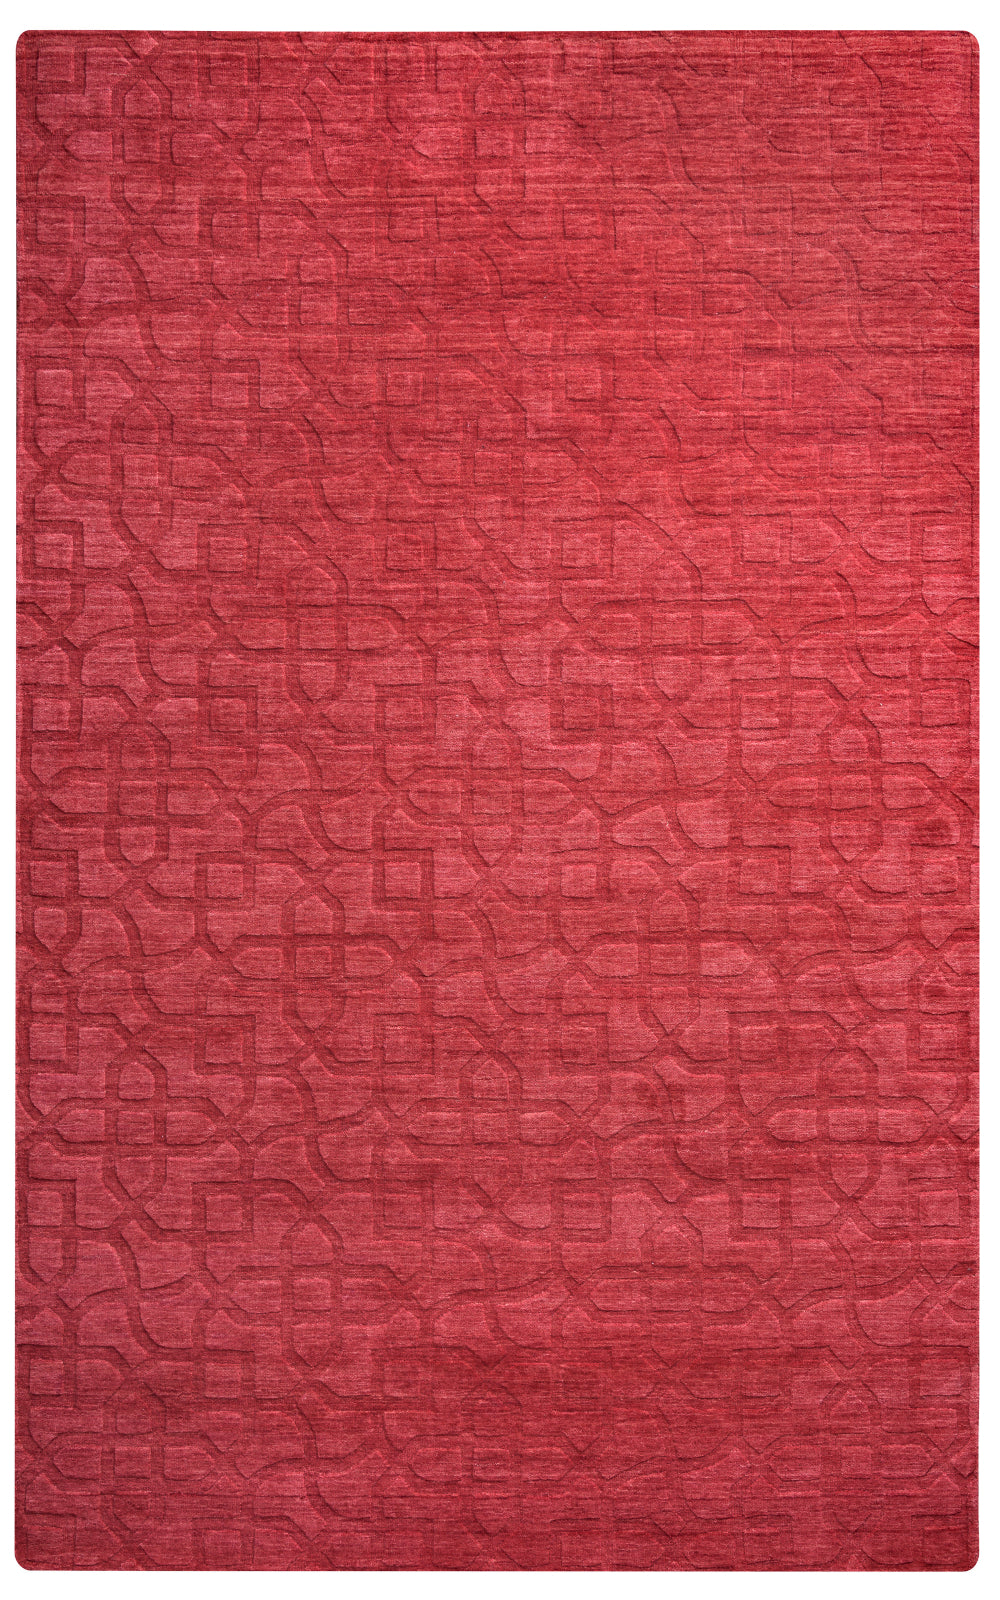 Rizzy Uptown UP2453 Area Rug main image